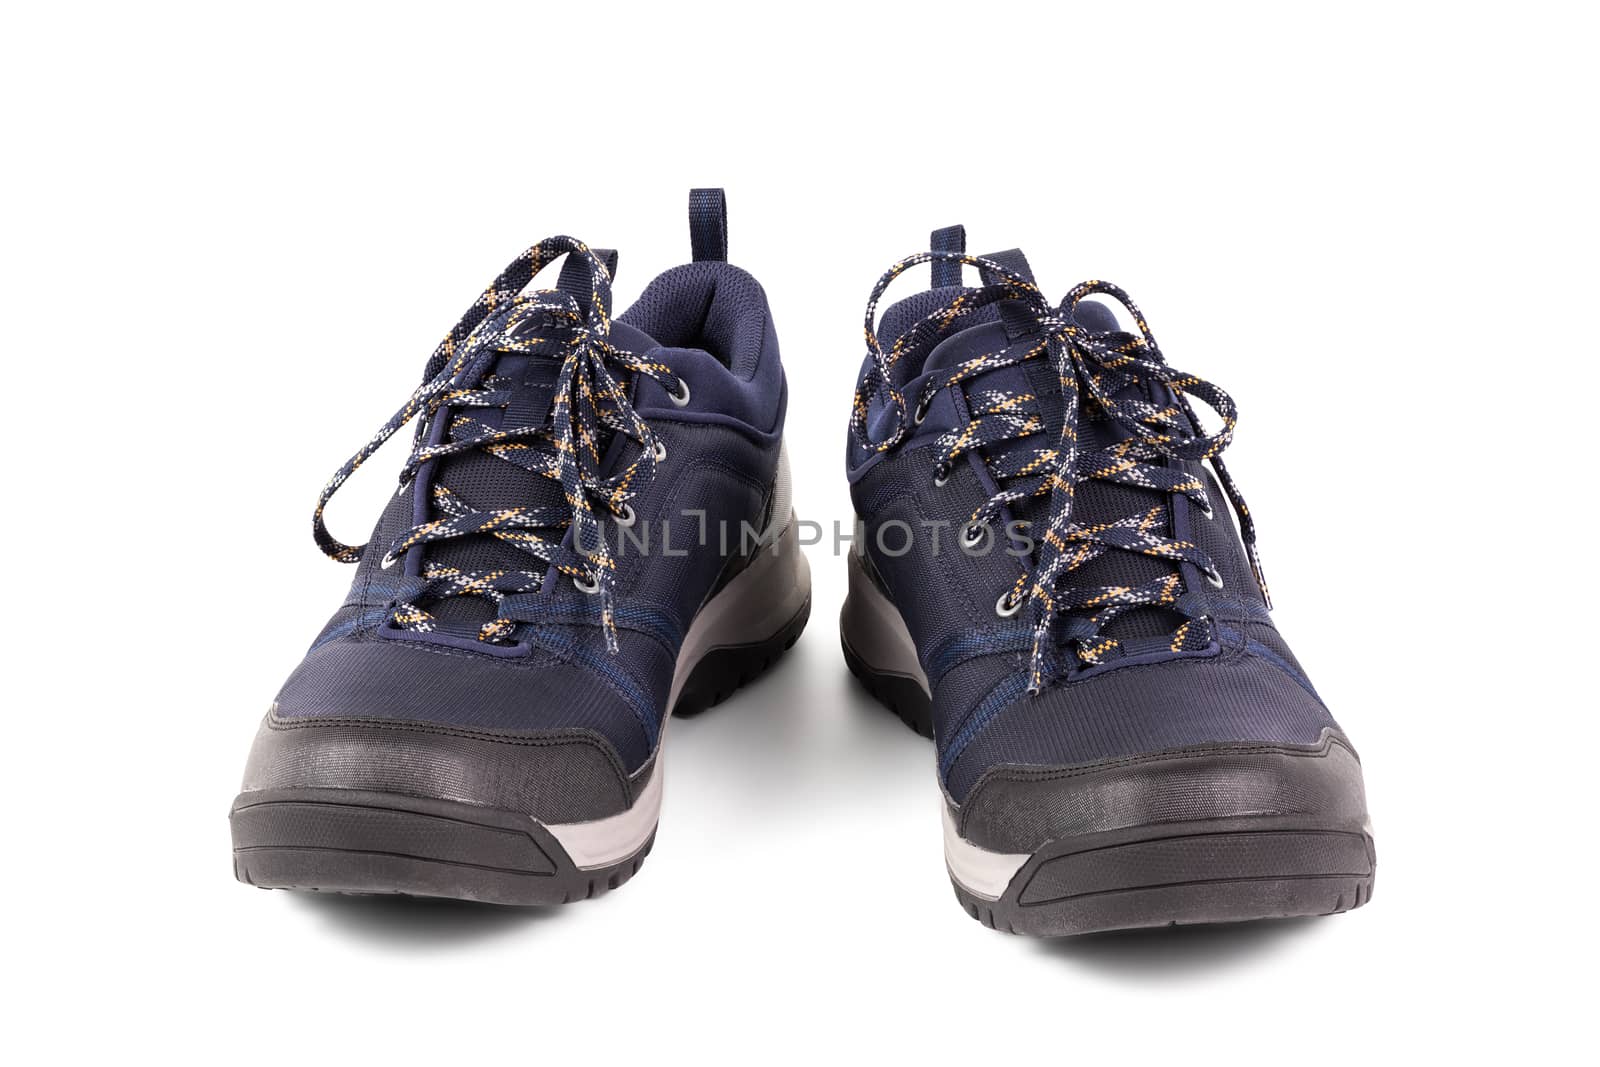 black and blue outdoor empty lightweight waterproof breathable fabric sneakers isolated on white background.